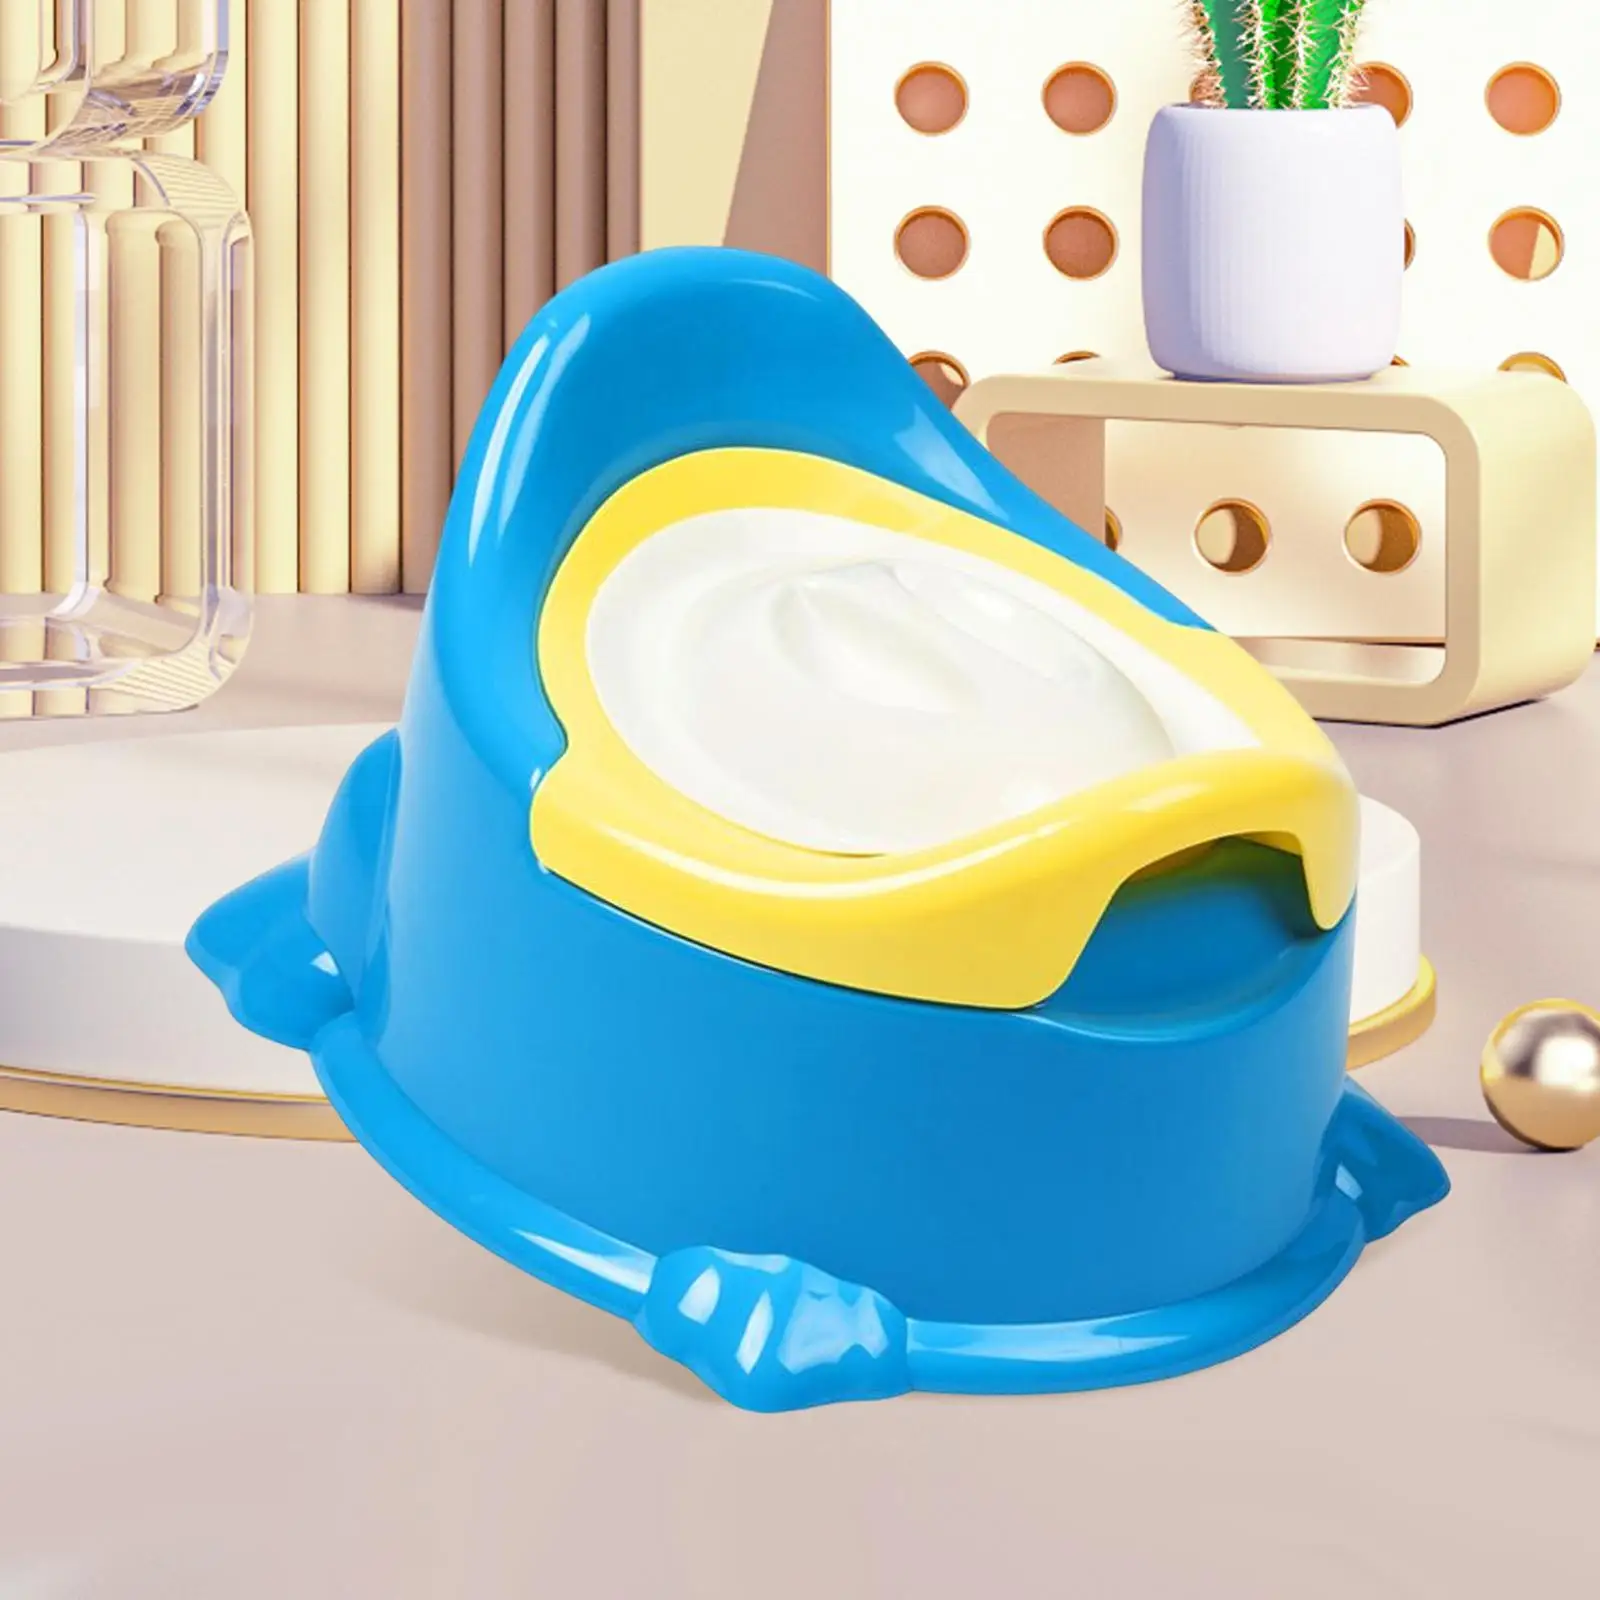 Baby Potty Kids Training Toilet Seat Comfortable for Babies 6-12 Month Baby